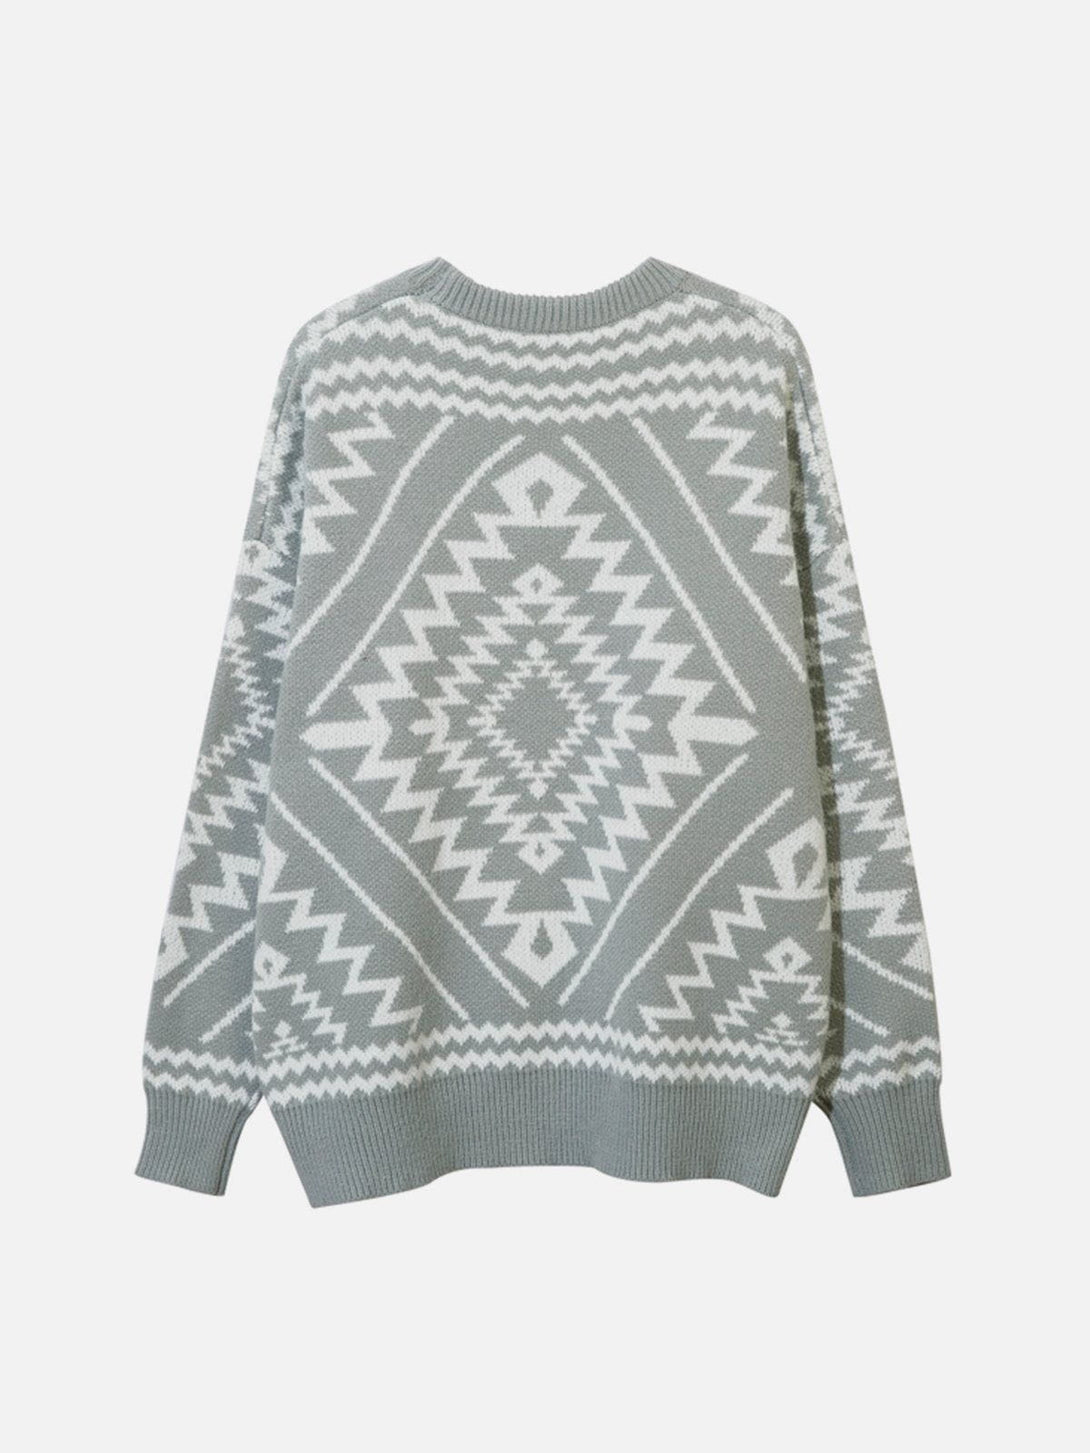 Ellesey - Totem Graphic Sweater-Streetwear Fashion - ellesey.com